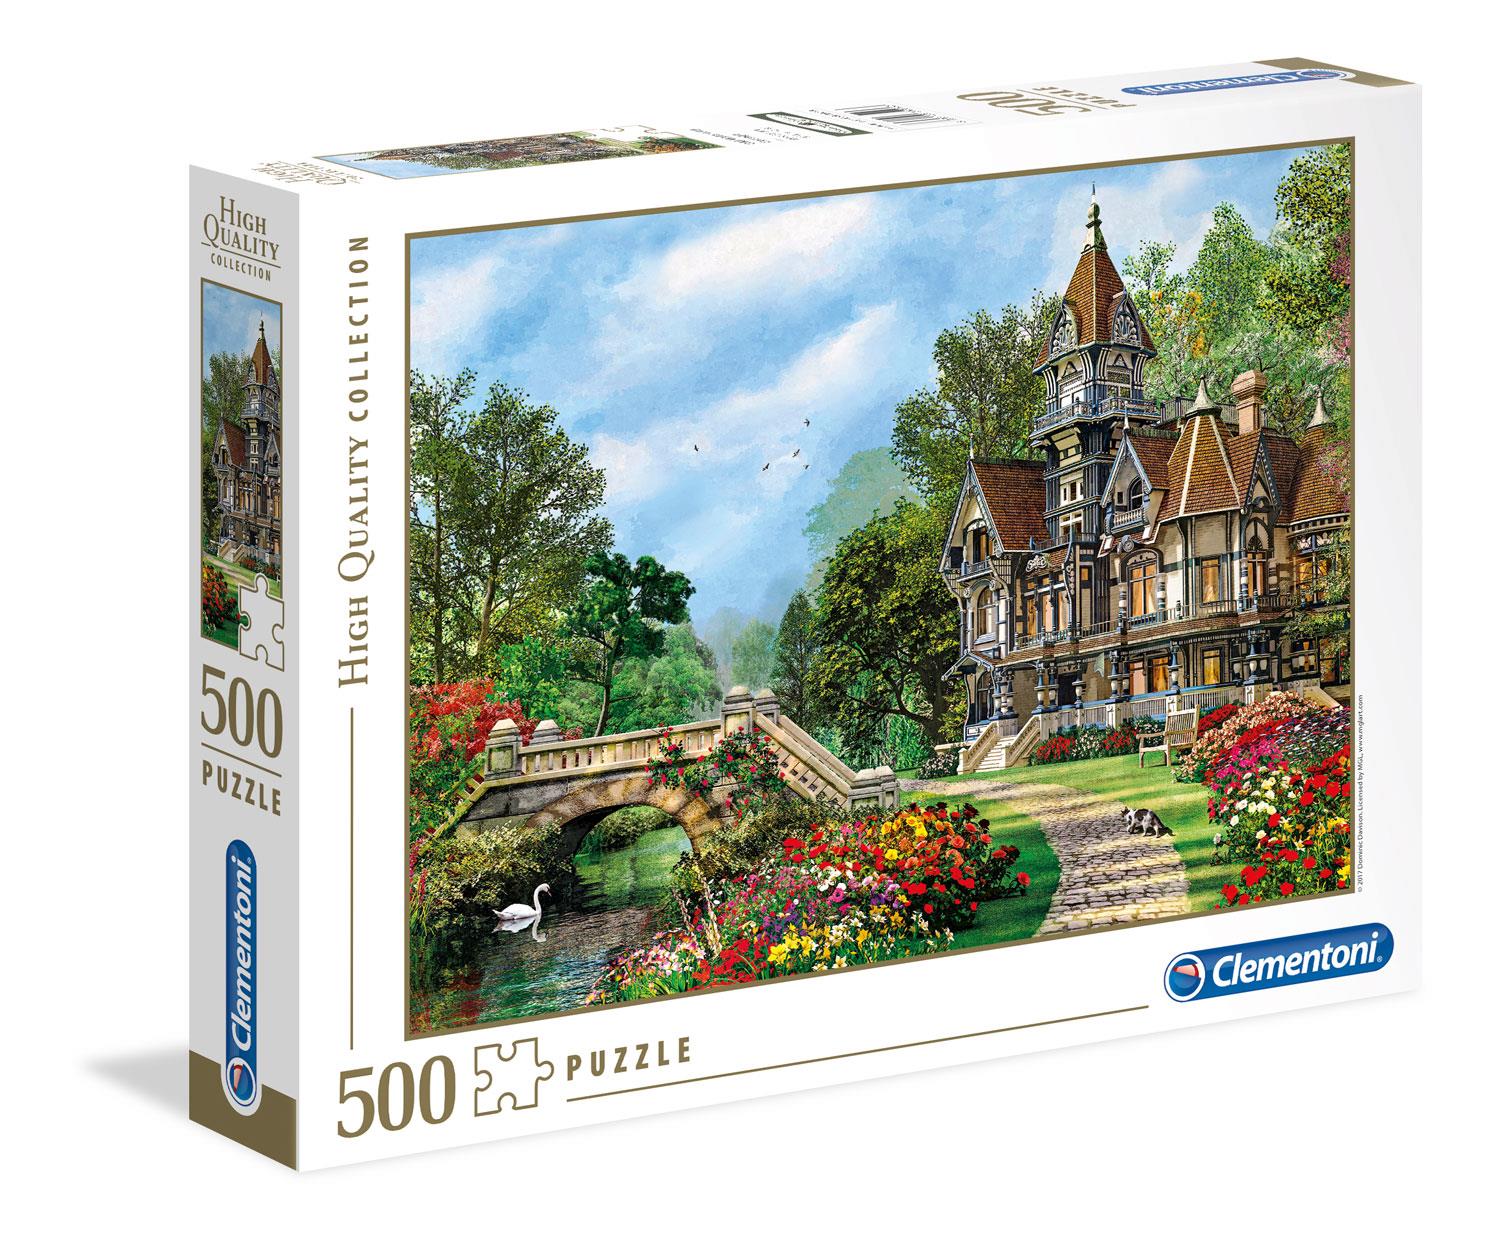 Clementoni Old Waterway Cottage High Quality Jigsaw Puzzle (500 Pieces) DAMAGED BOX